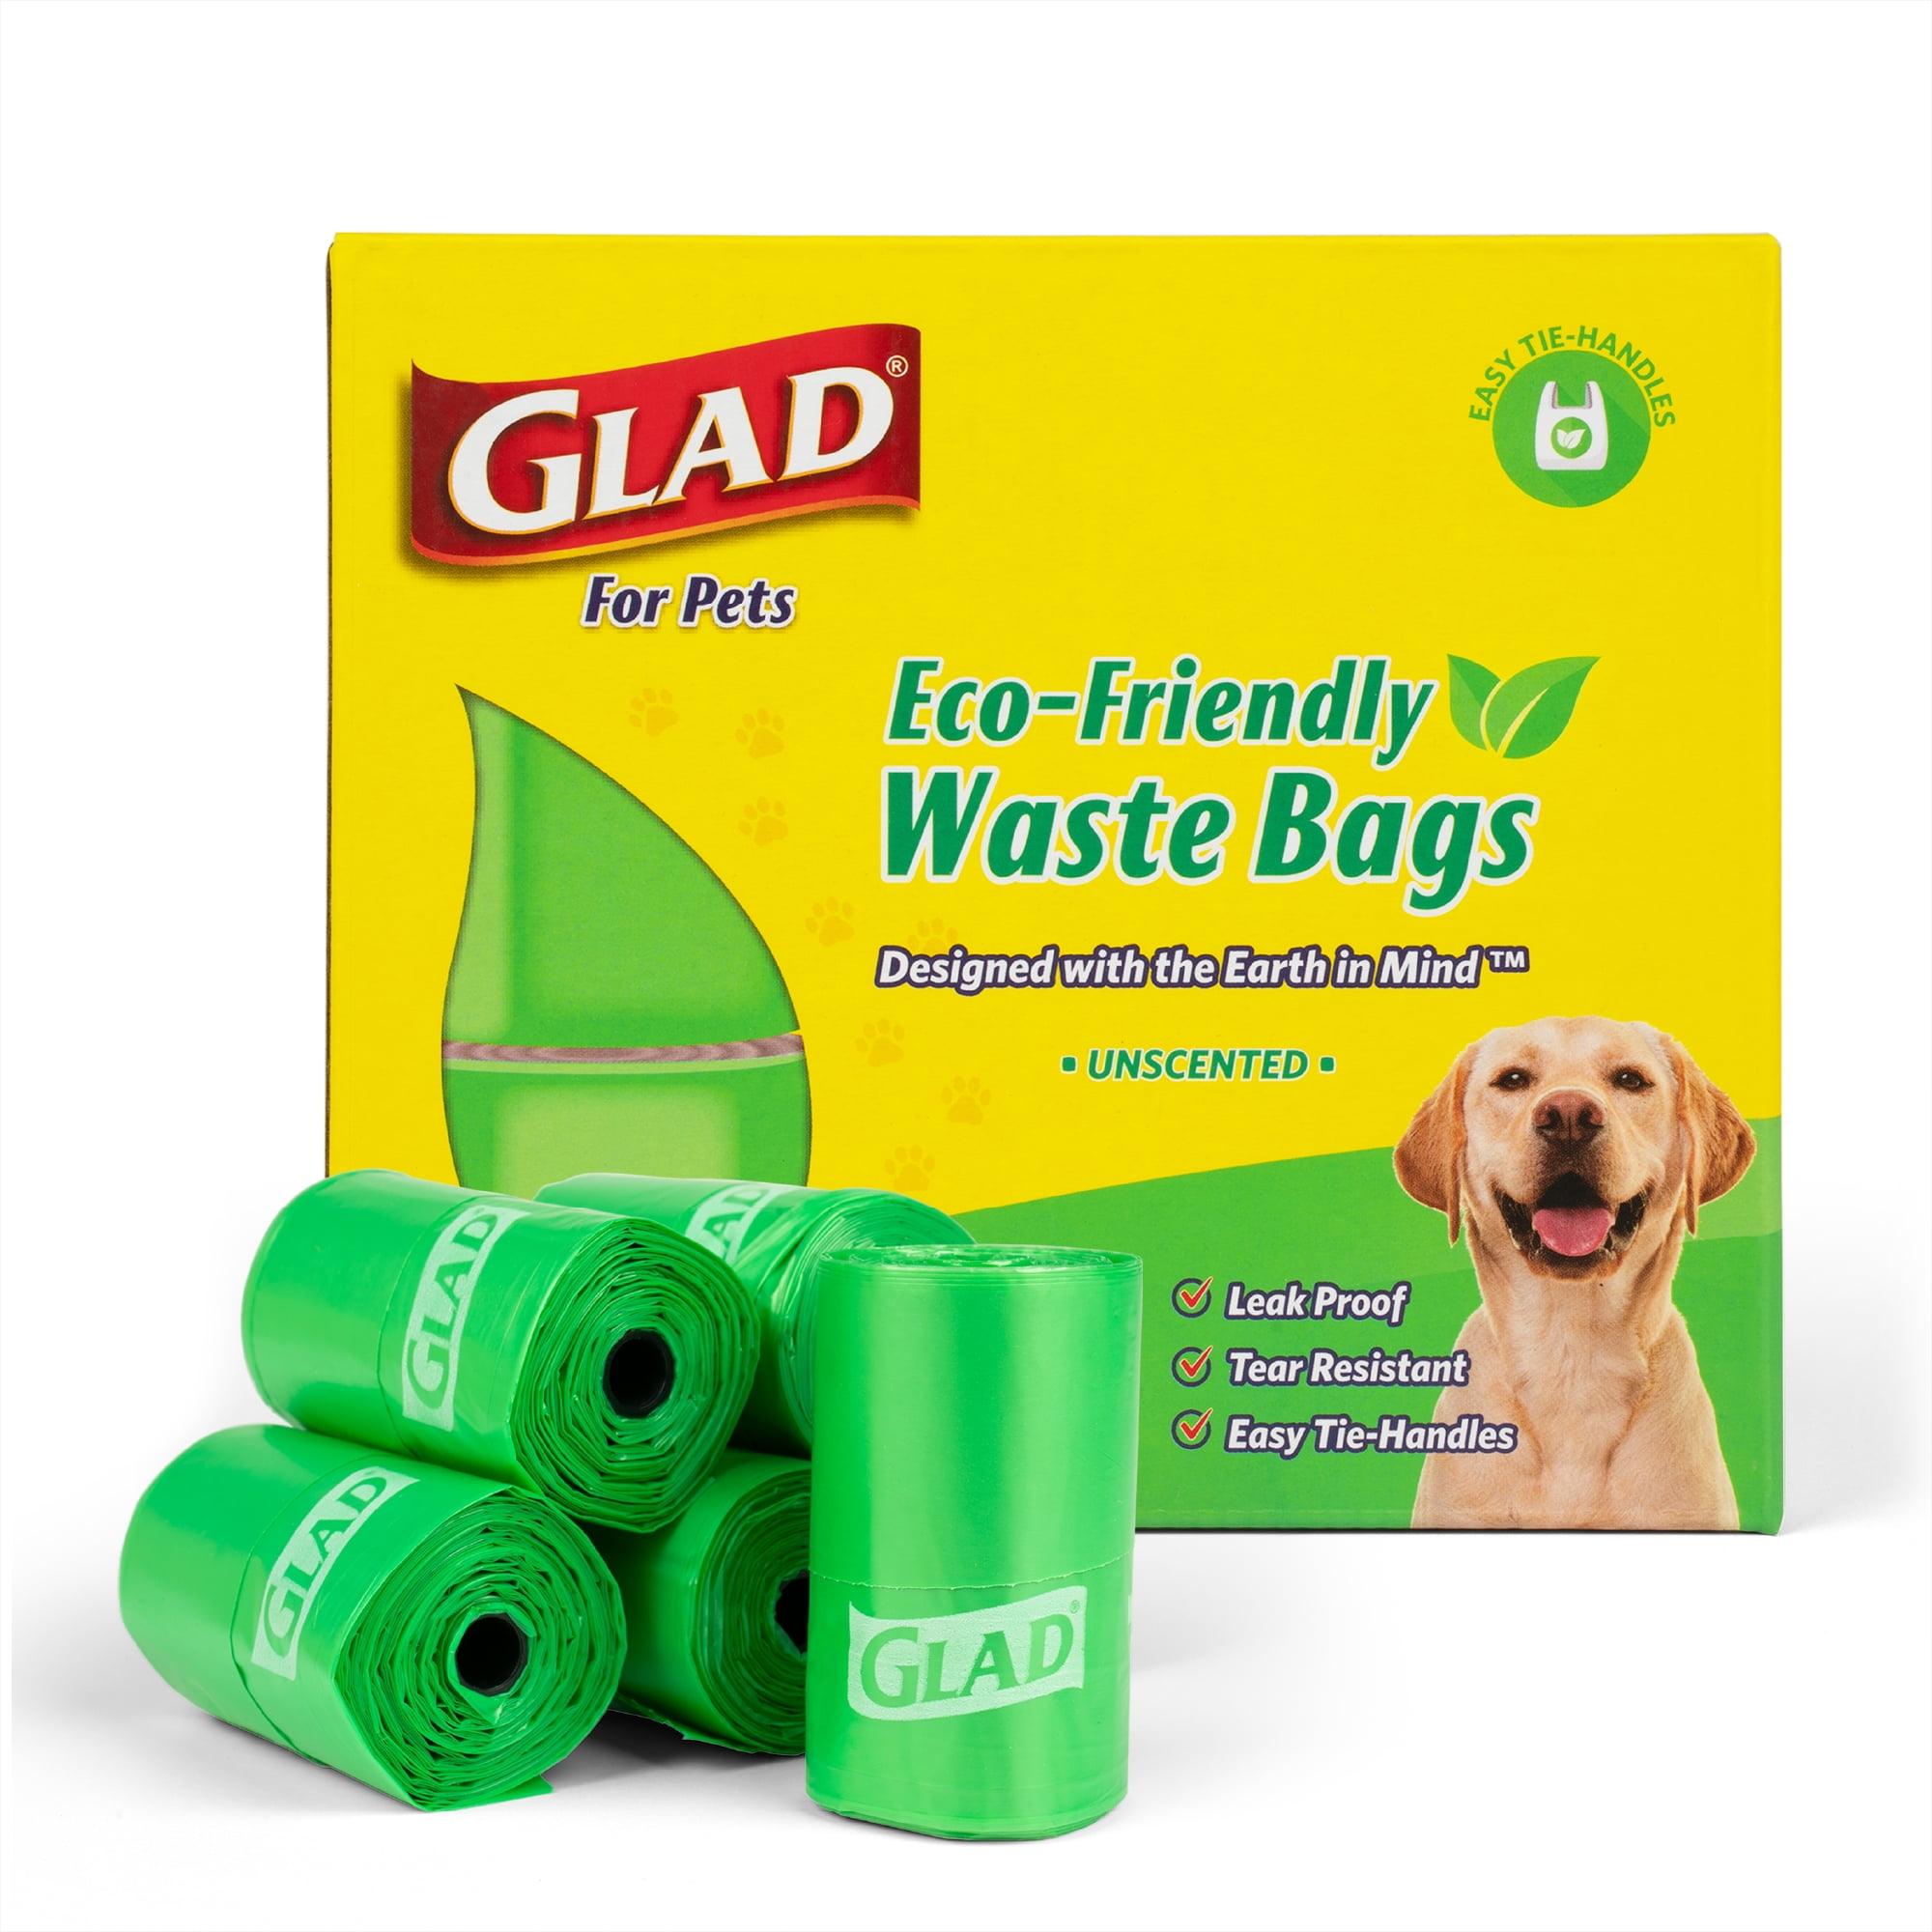 Doggie Poop Bags Dogs 6.5 x 14.5 Dog Cat Tie Handle Pet Waste Bags Includes Bag Holder Black and Blue Color 